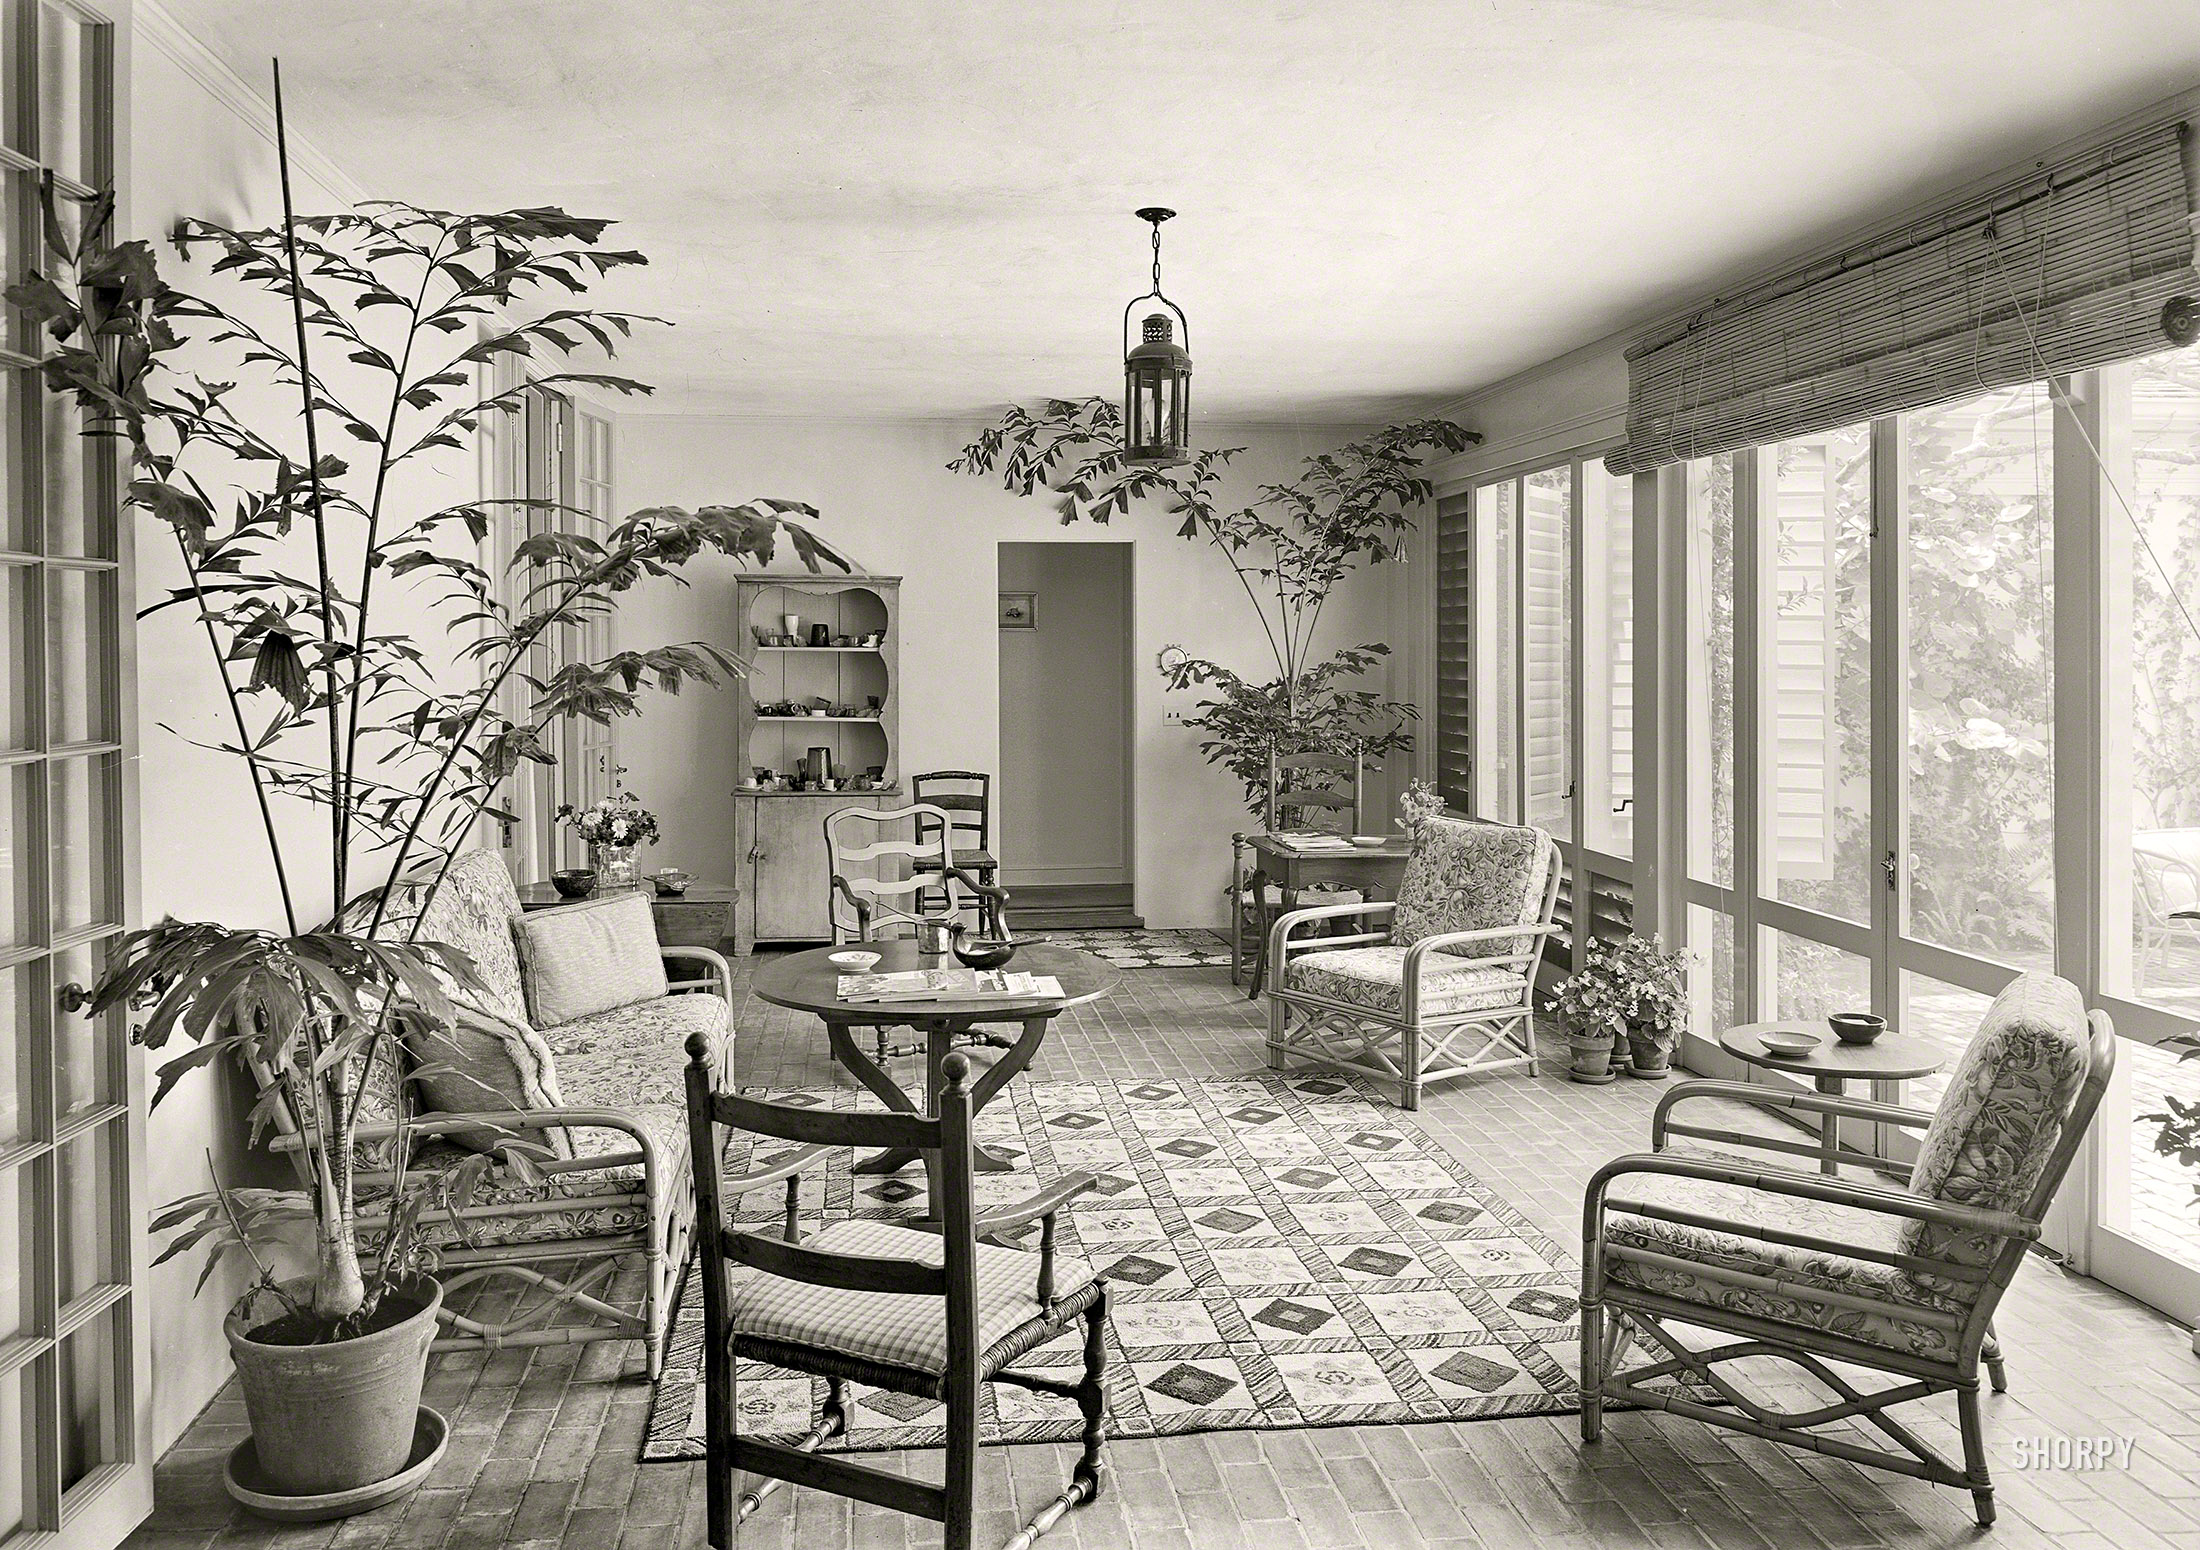 March 29, 1941. "James H. McGraw Jr. residence in Hobe Sound, Florida. Loggia. Henry Corse, architect; Jessup Inc., decorator." Note glass hats and boots among the tchotchkes in the cupboard. Gottscho-Schleisner photo. View full size.